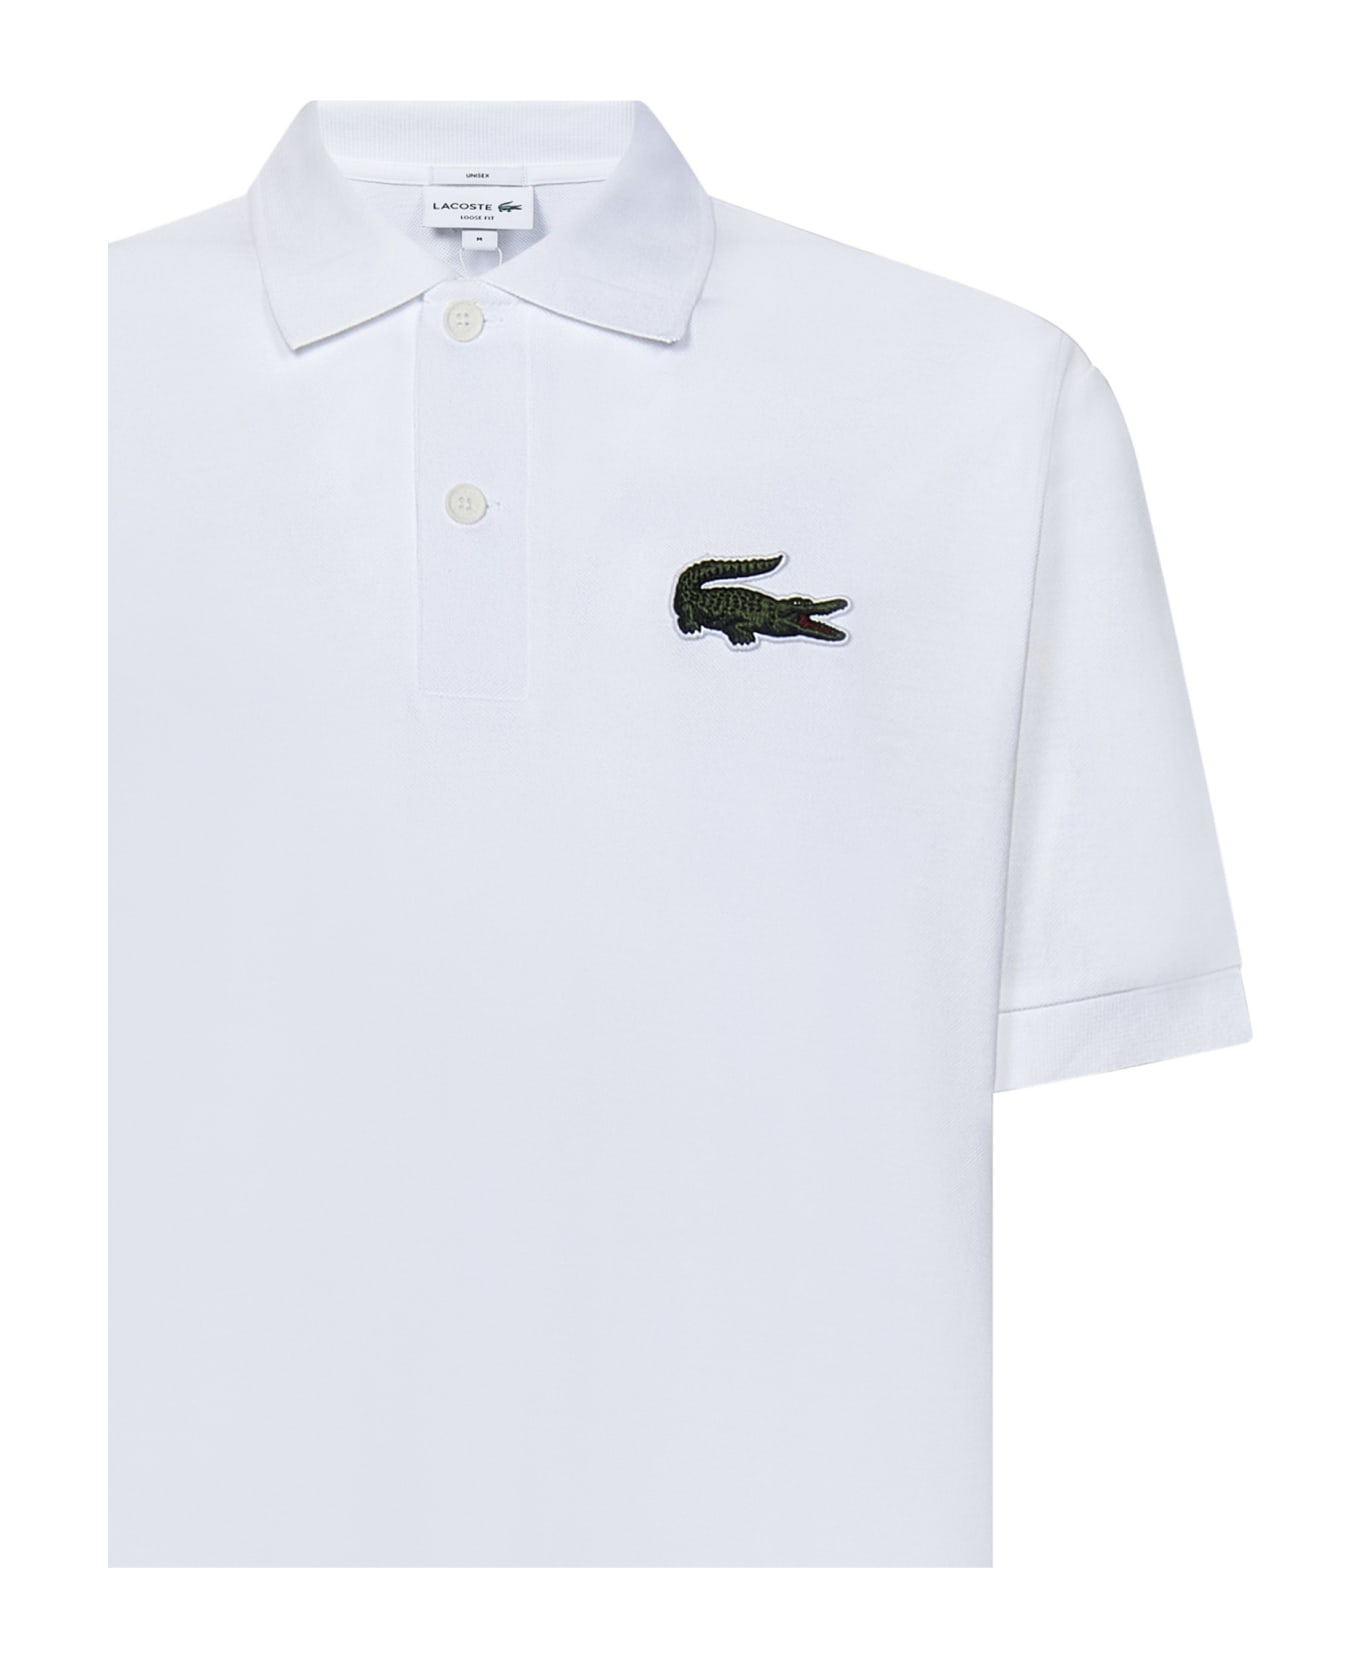 Lacoste Original Polo with L.12.12 Loose Fit Polo with Shirt - White